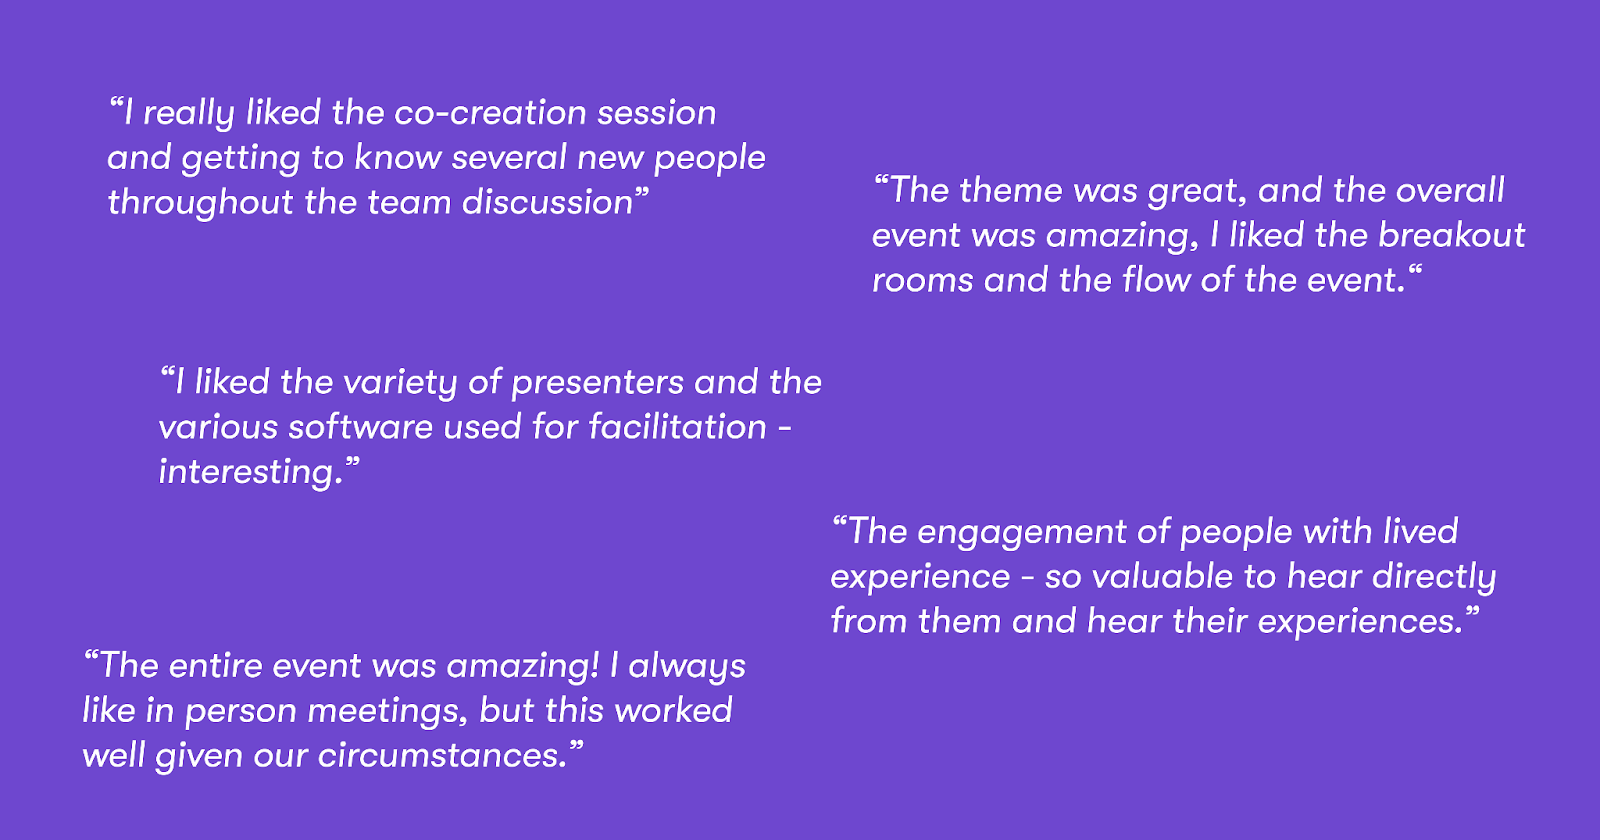 Examples of event participants' feedback.